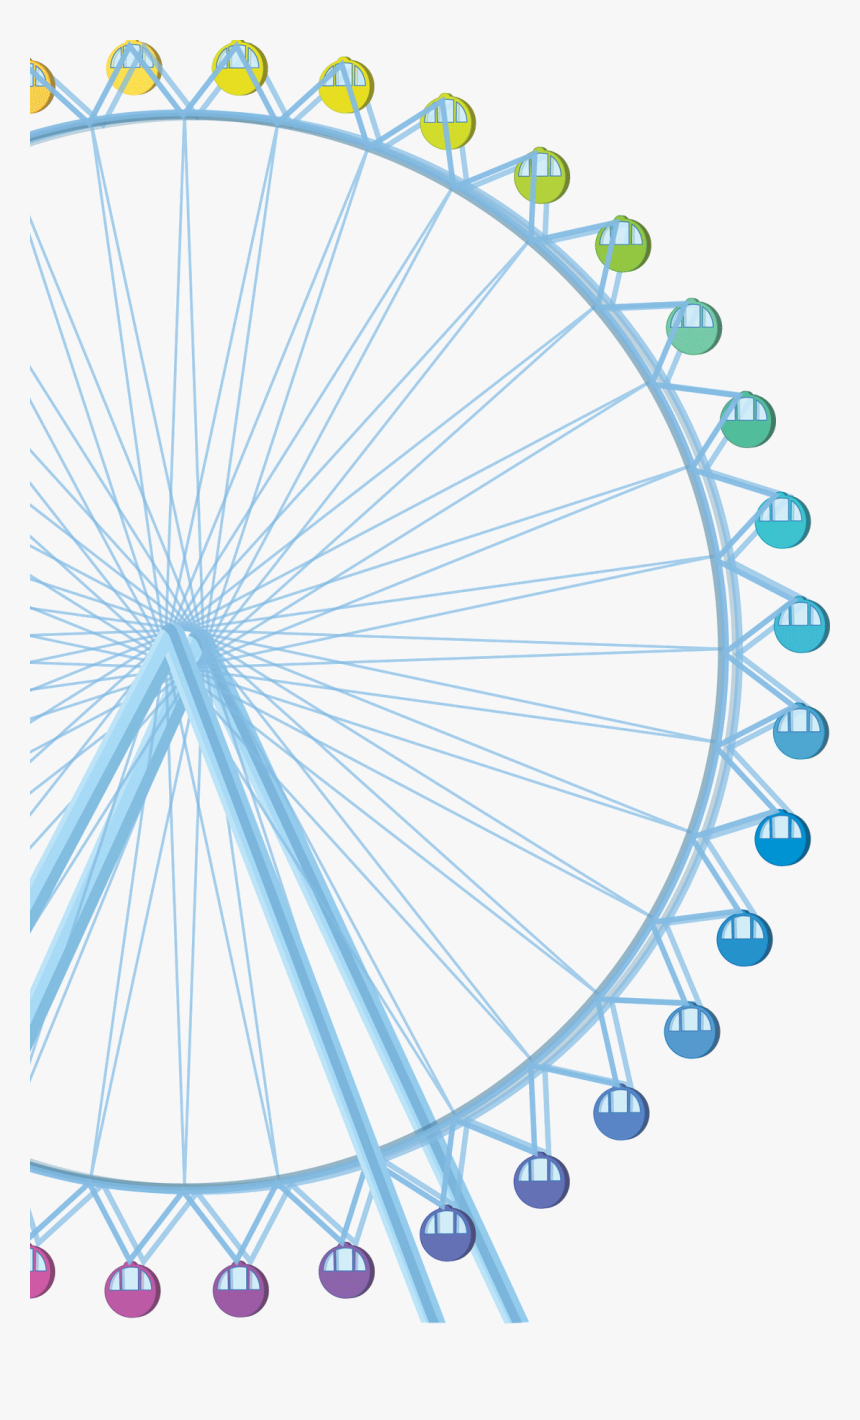 Giant Wheel Png Picture - Transparent Background Ferris Wheel Gif, Png Download, Free Download